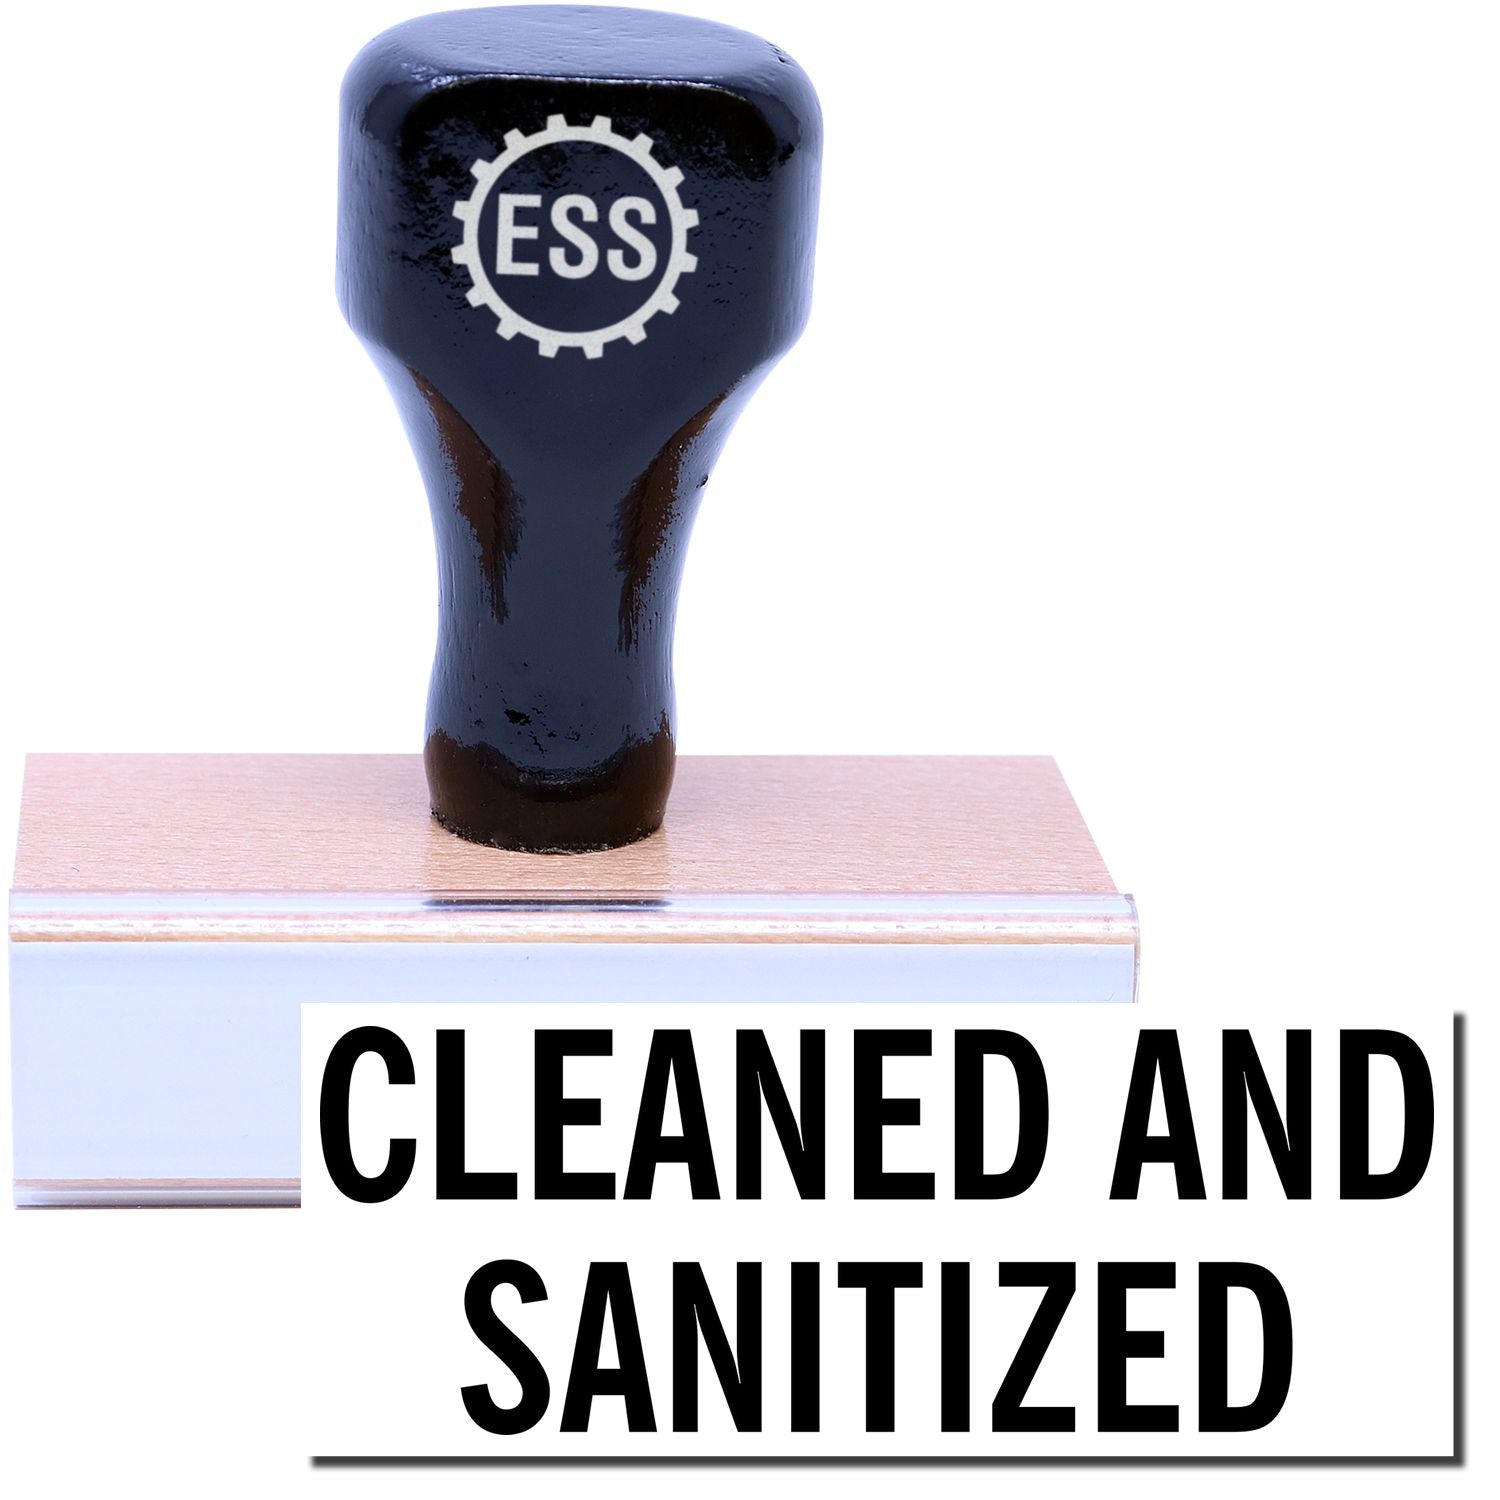 A stock office rubber stamp with a stamped image showing how the text "CLEANED AND SANITIZED" is displayed after stamping.